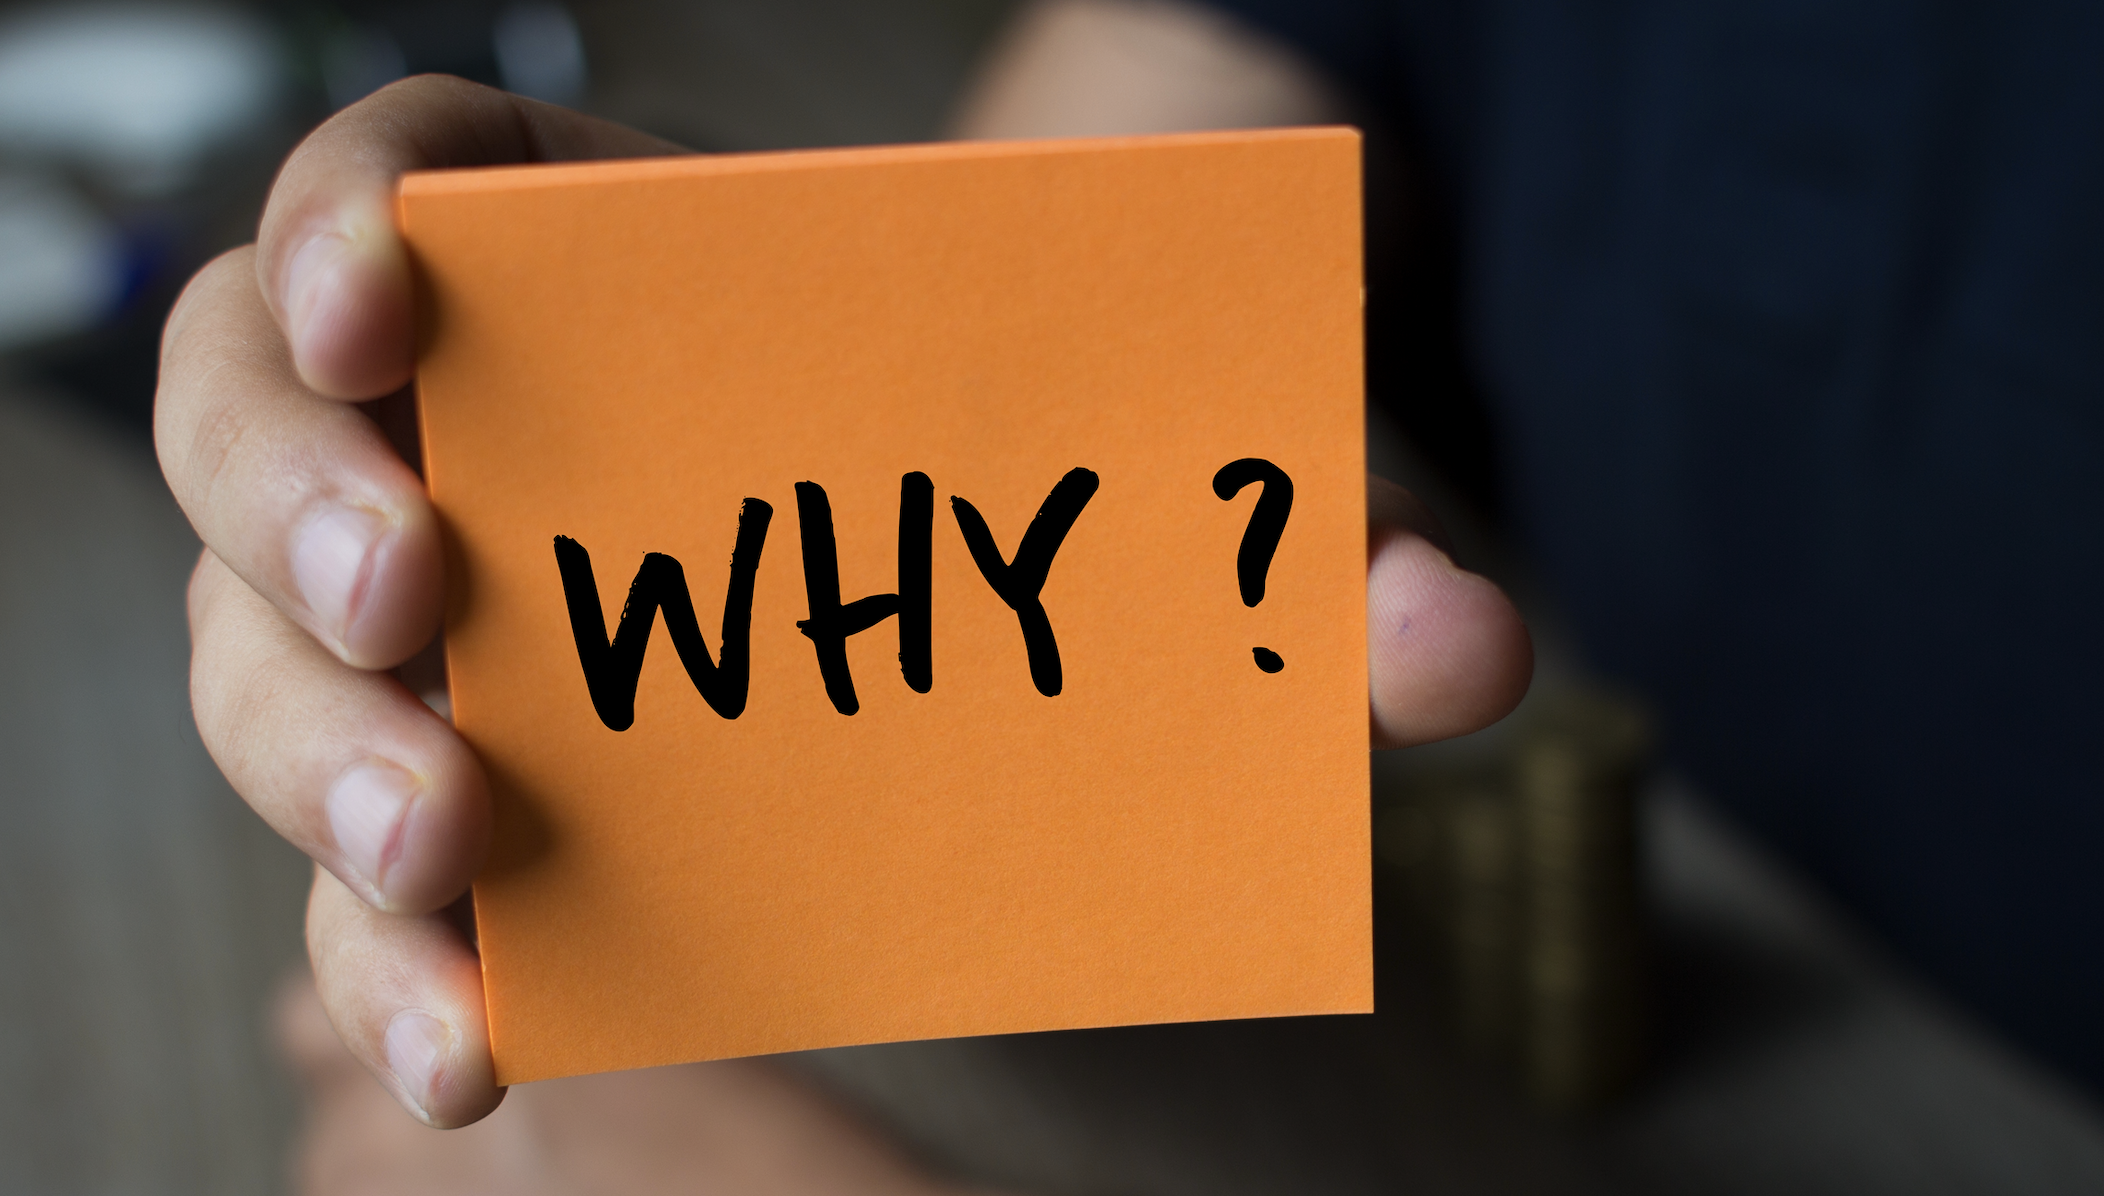 Use the "5 Whys" to Understand Employee Problems